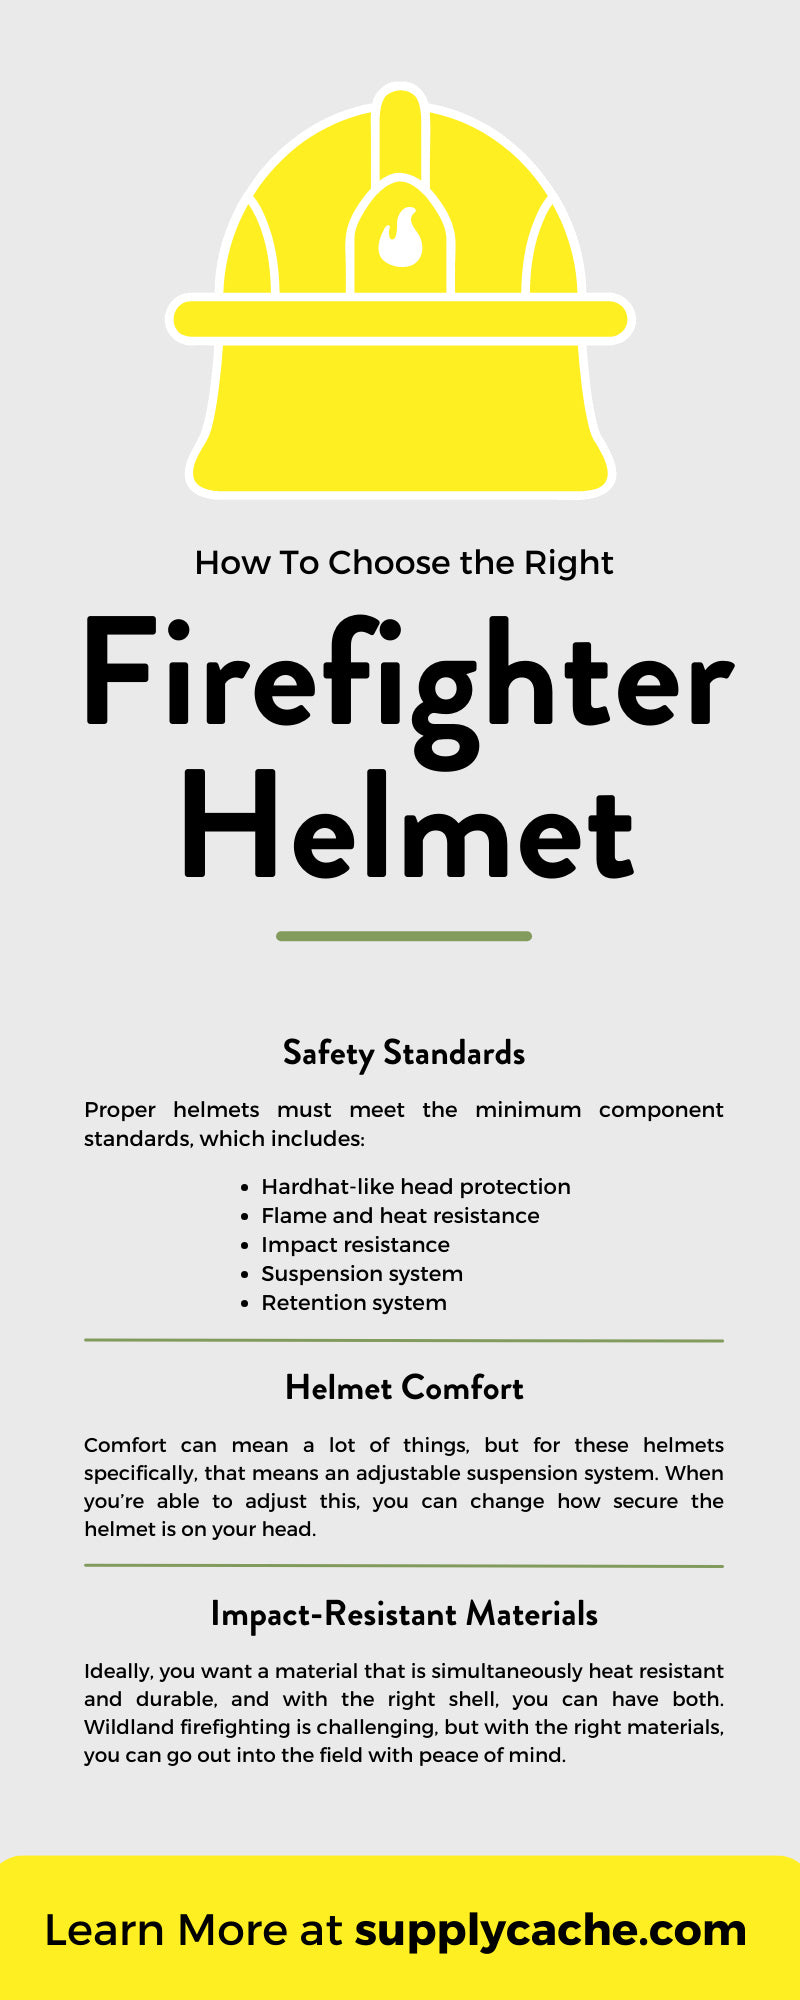 How To Choose the Right Firefighter Helmet